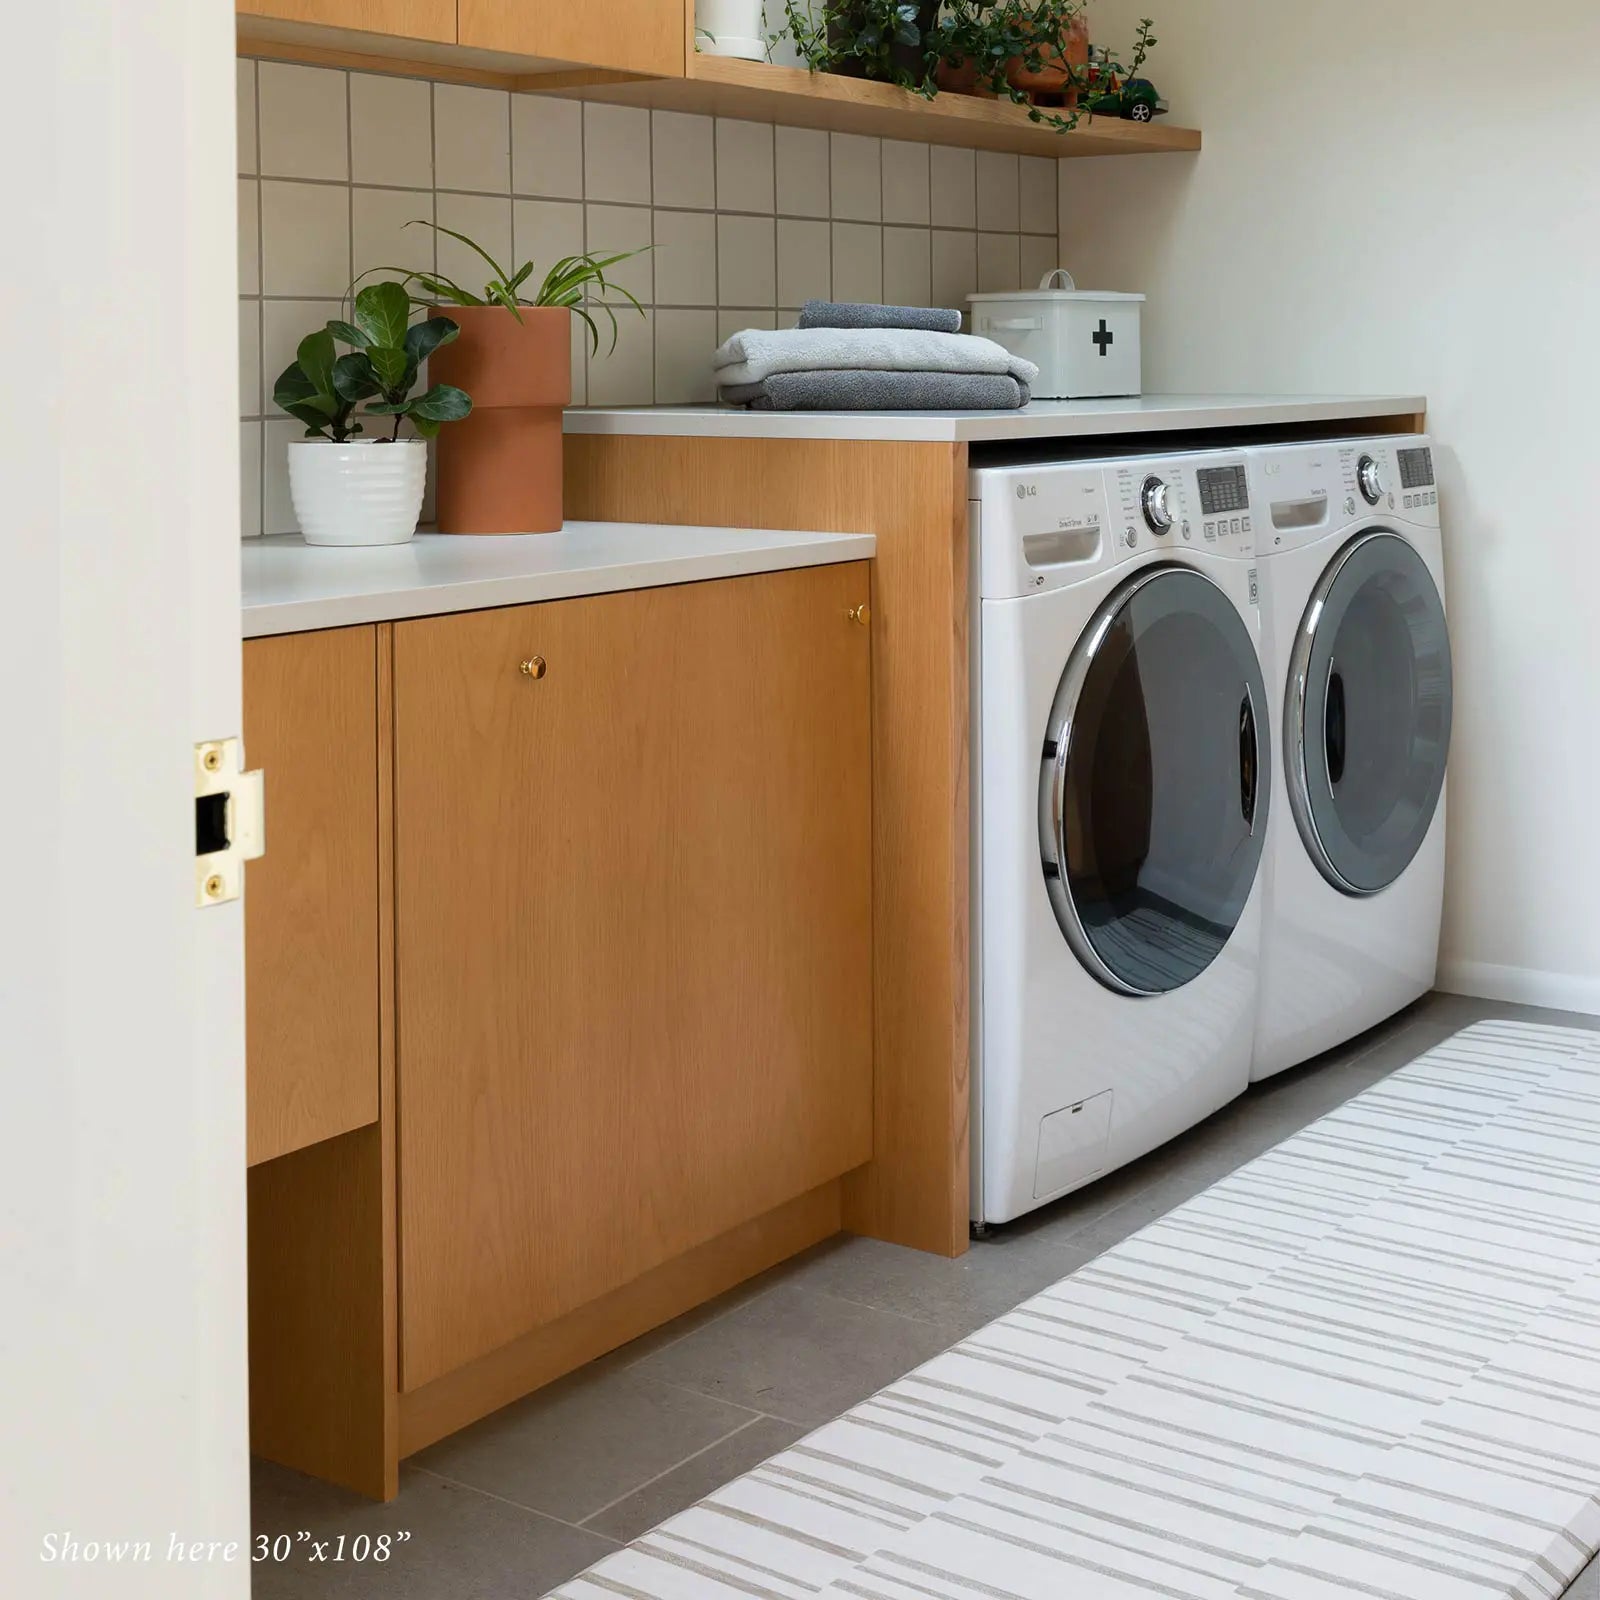 Beige inverted stripe kitchen mat in laundry room in front of washer dryer in size 30x108.